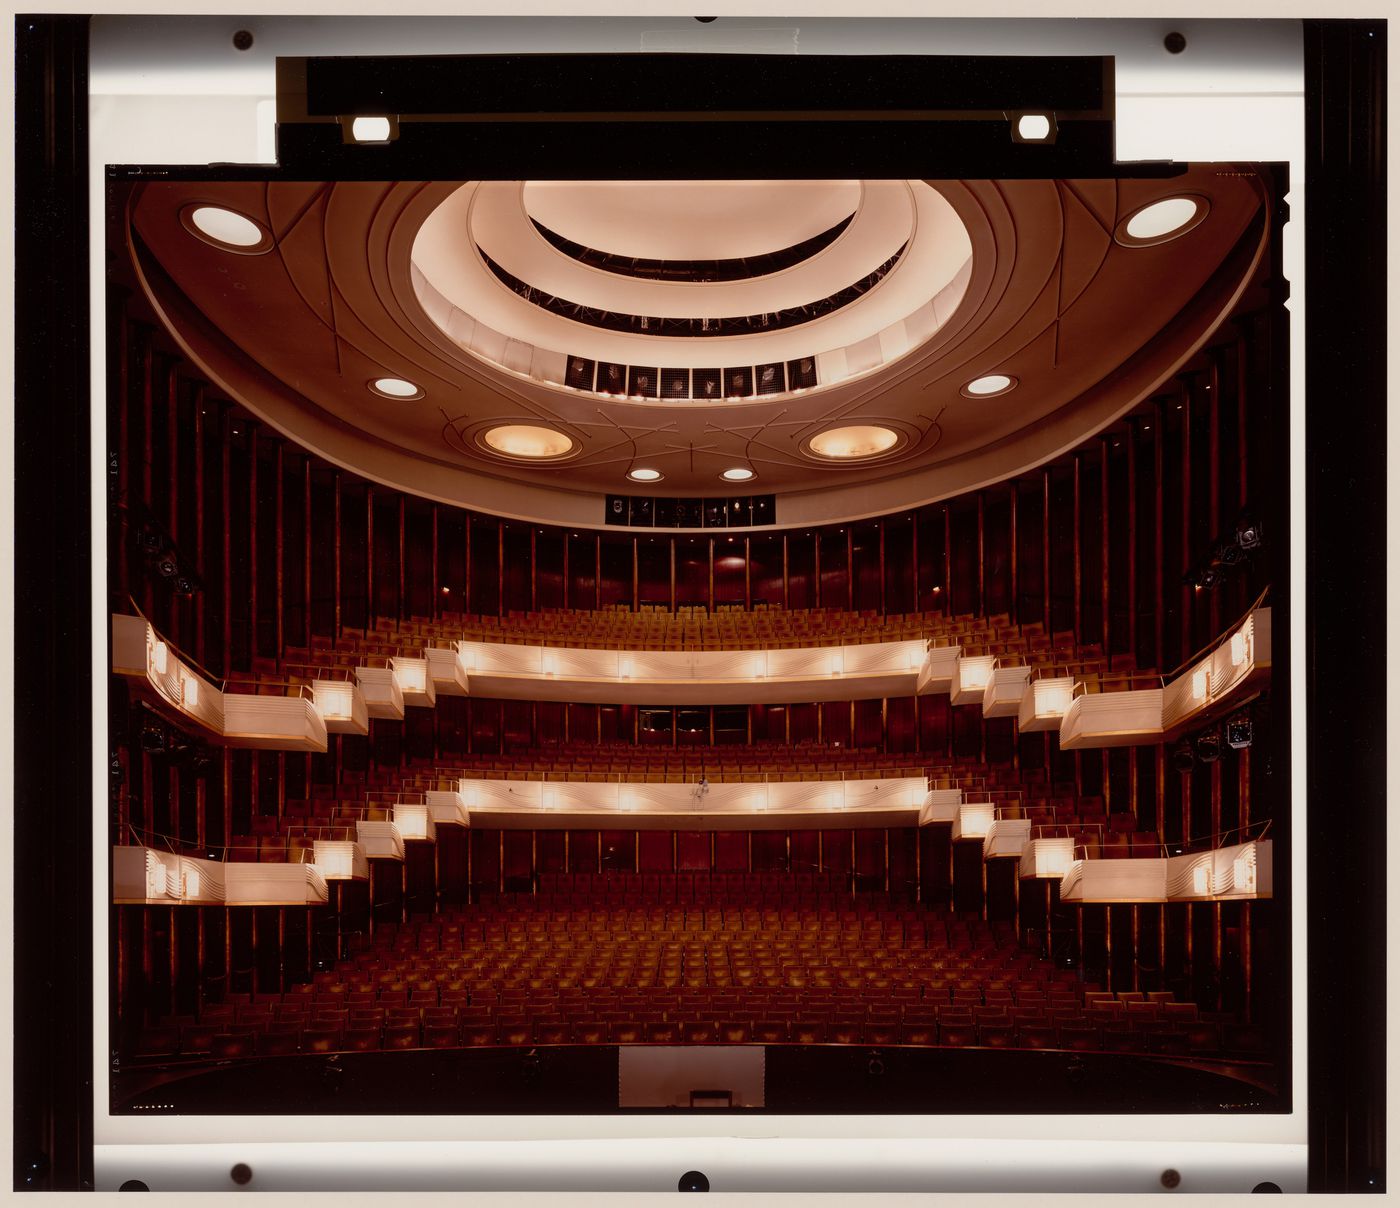 Opernhaus, 843 seats, Wuppertal, Germany